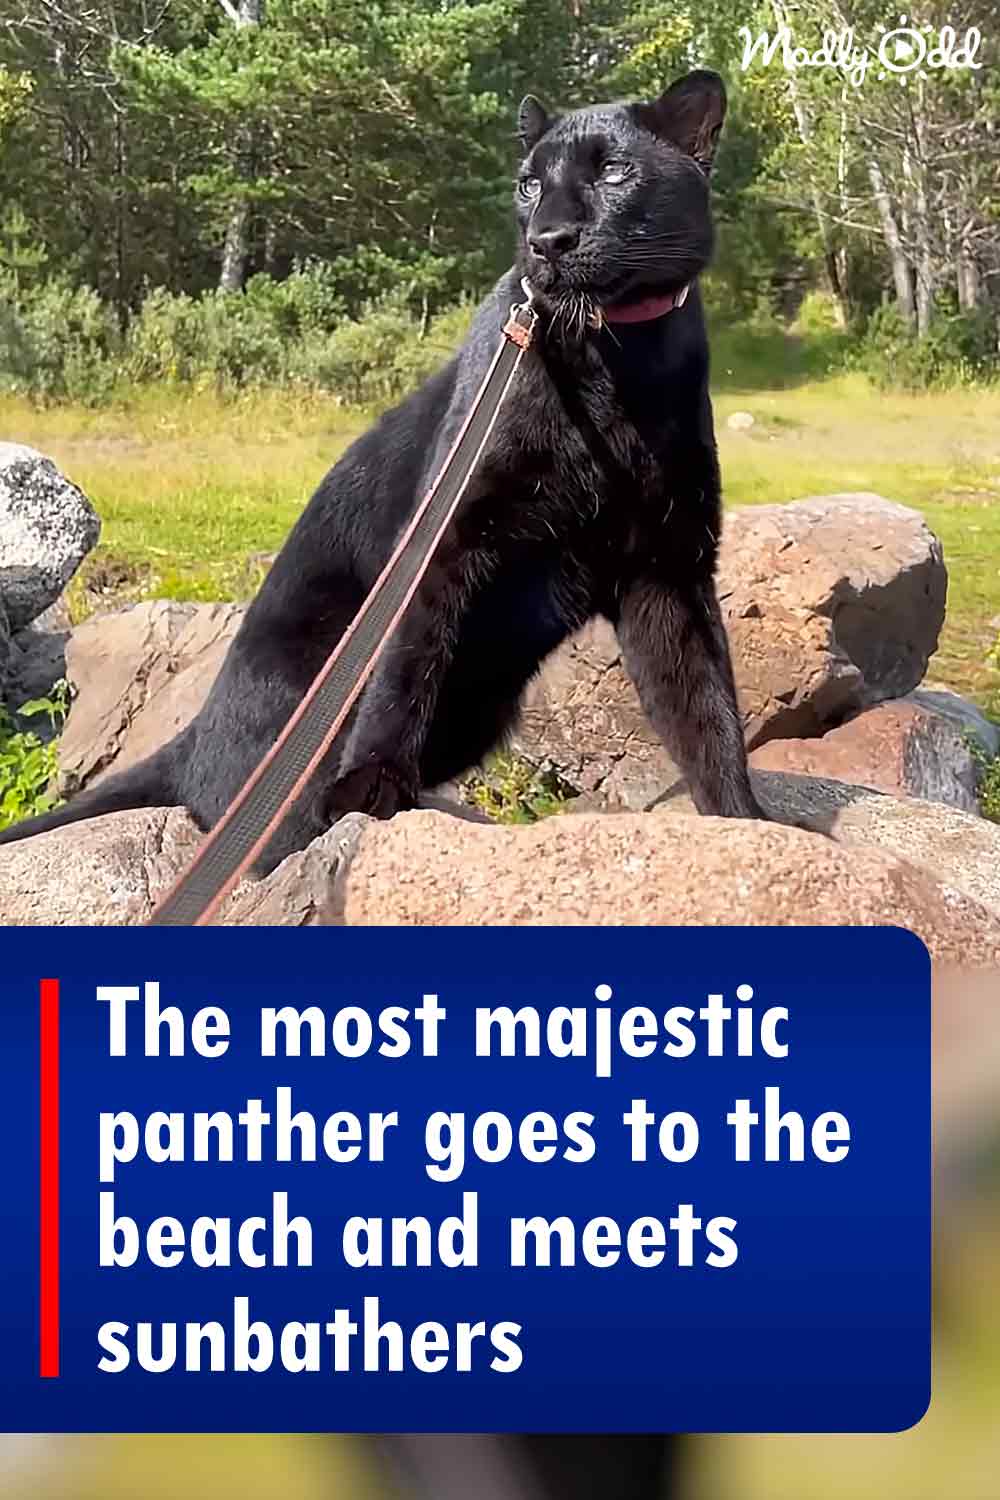 The most majestic panther goes to the beach and meets sunbathers